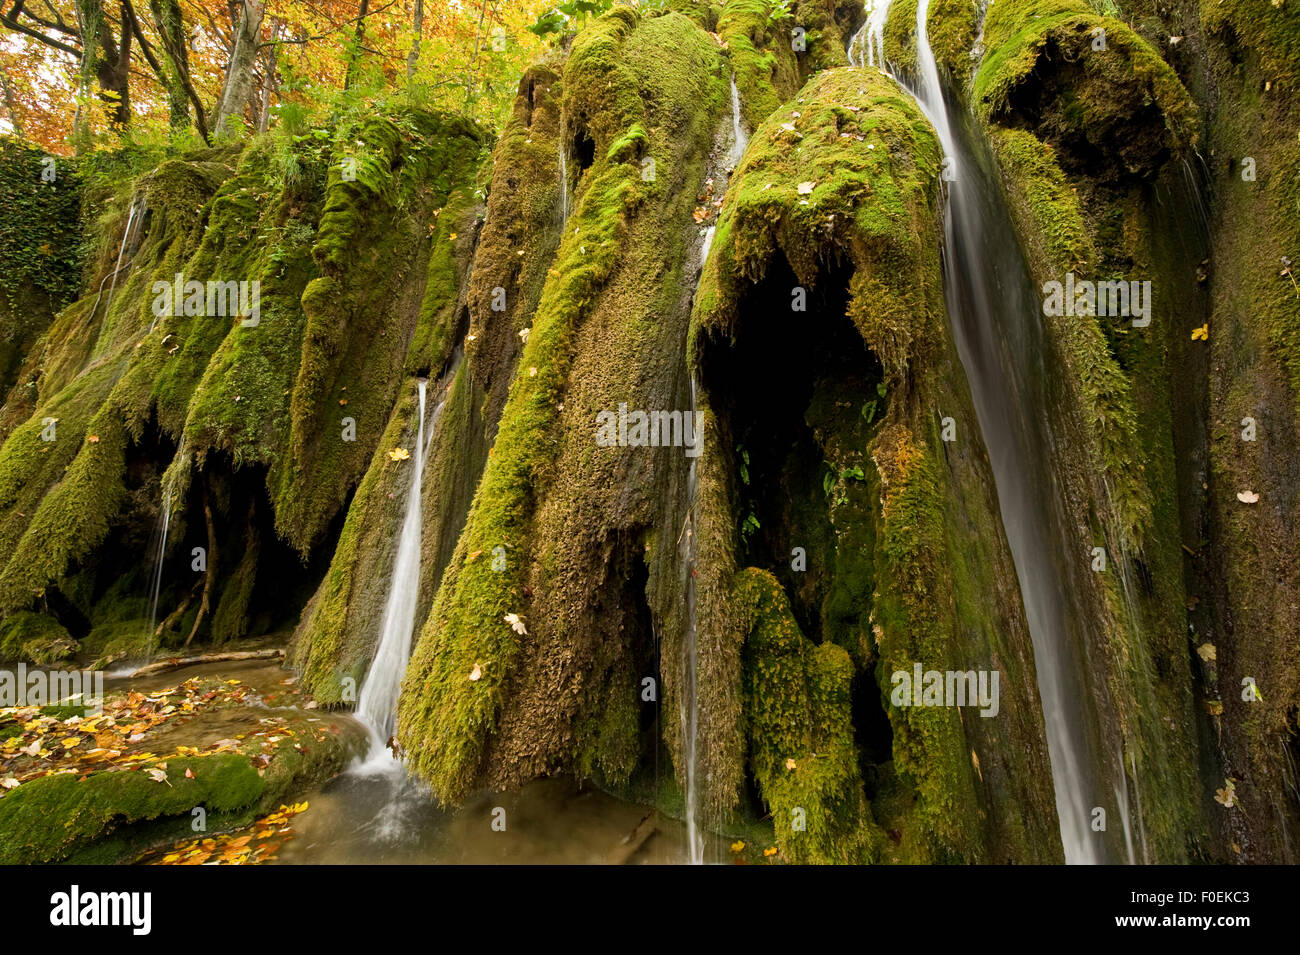 Waterfalls and abundant mosses (Cratoneuron commutatum) and (Bryum ventricosum) growing on the Labudovac barrier, Upper Lakes, Plitvice Lakes National Park, Croatia, October 2008 Stock Photo